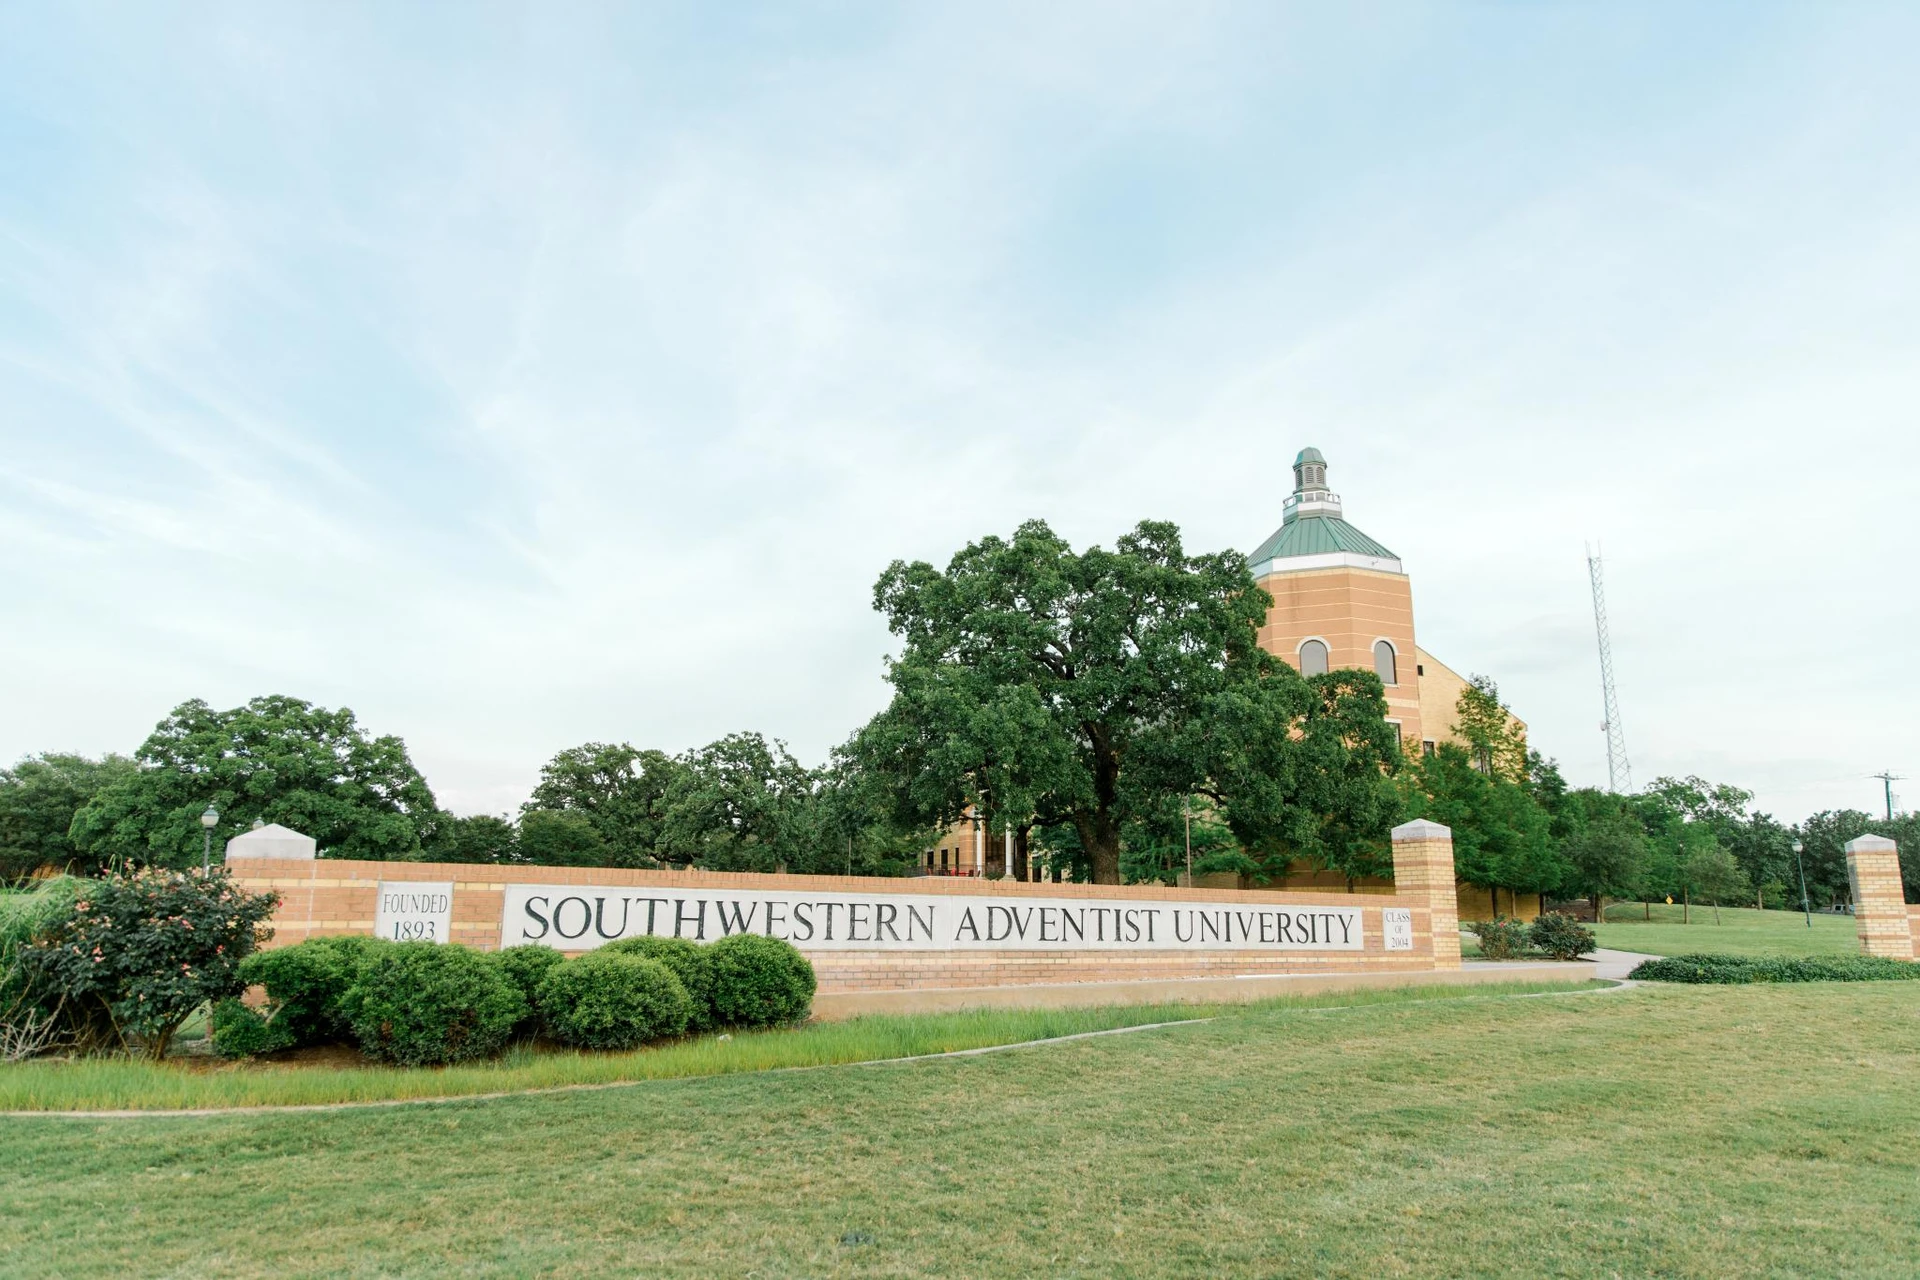 Campus sign made of bricks that reads "Southwestern Adventist University" with the top of Pechero Hall showing behind trees